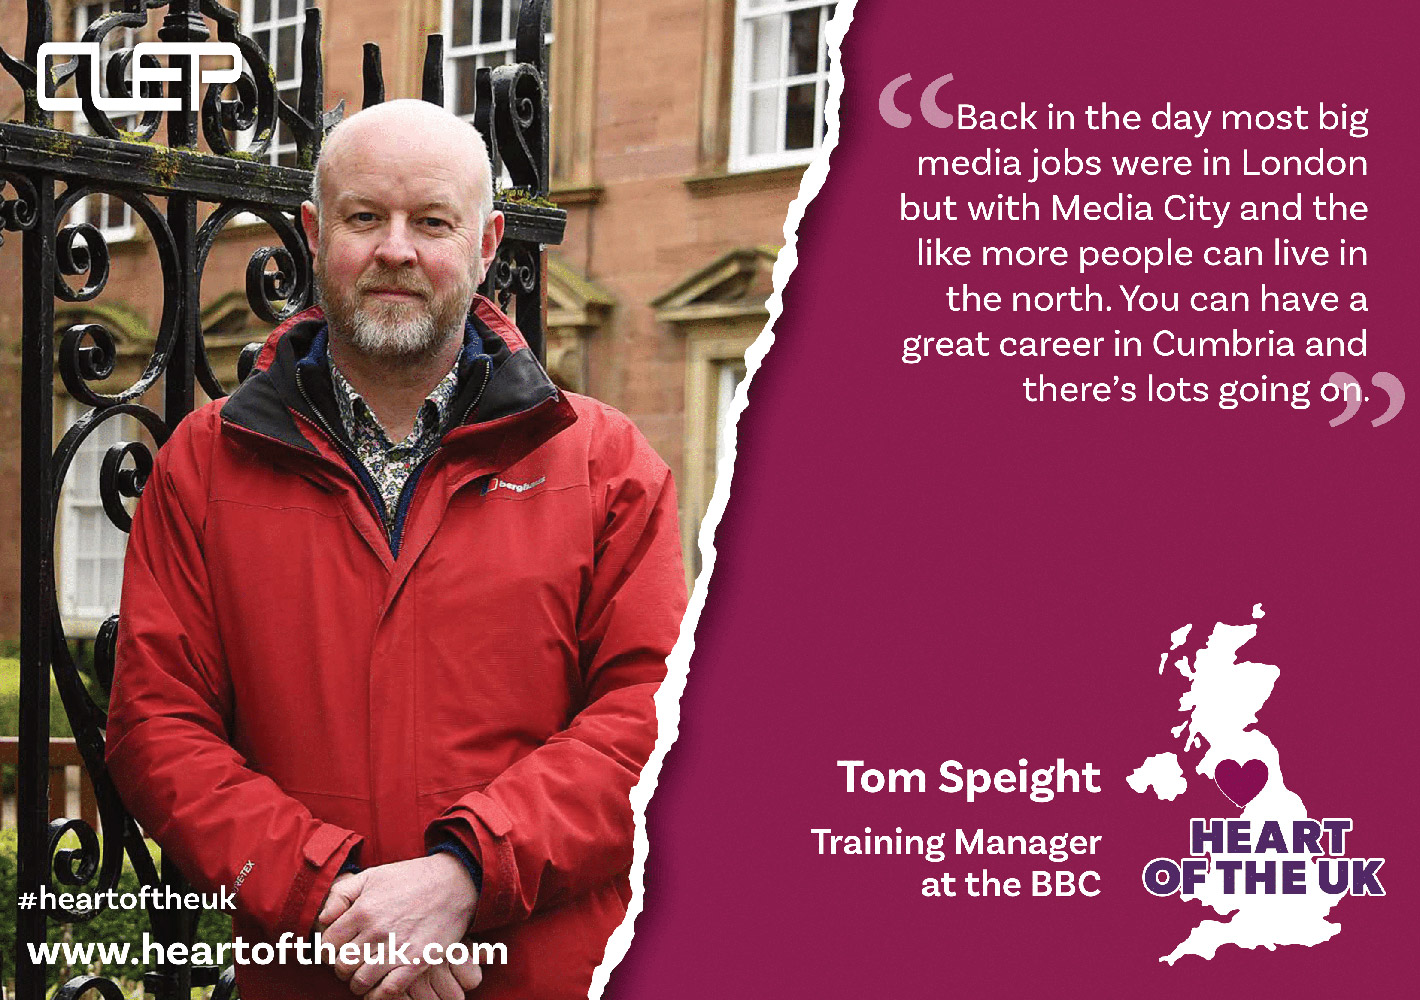 Heart of the UK: Back in the day most big media jobs were in London, but with Media City and the like, more people can live in the North. You can have a great career in Cumbria and there's lots going on. (Photo of Tom Speight)